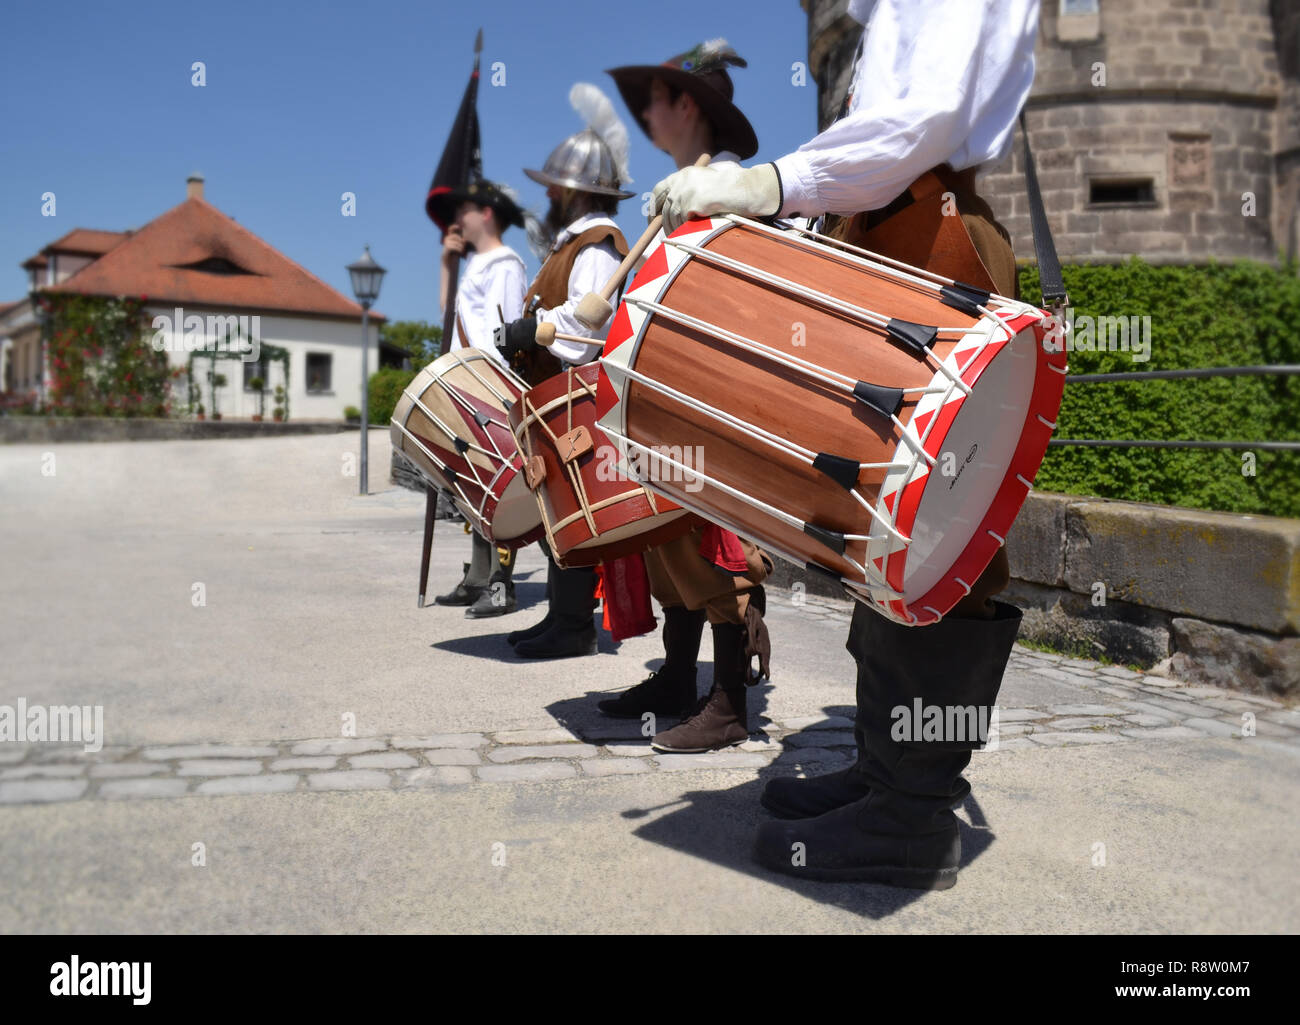 medieval drum festival knight historic games parade Stock Photo